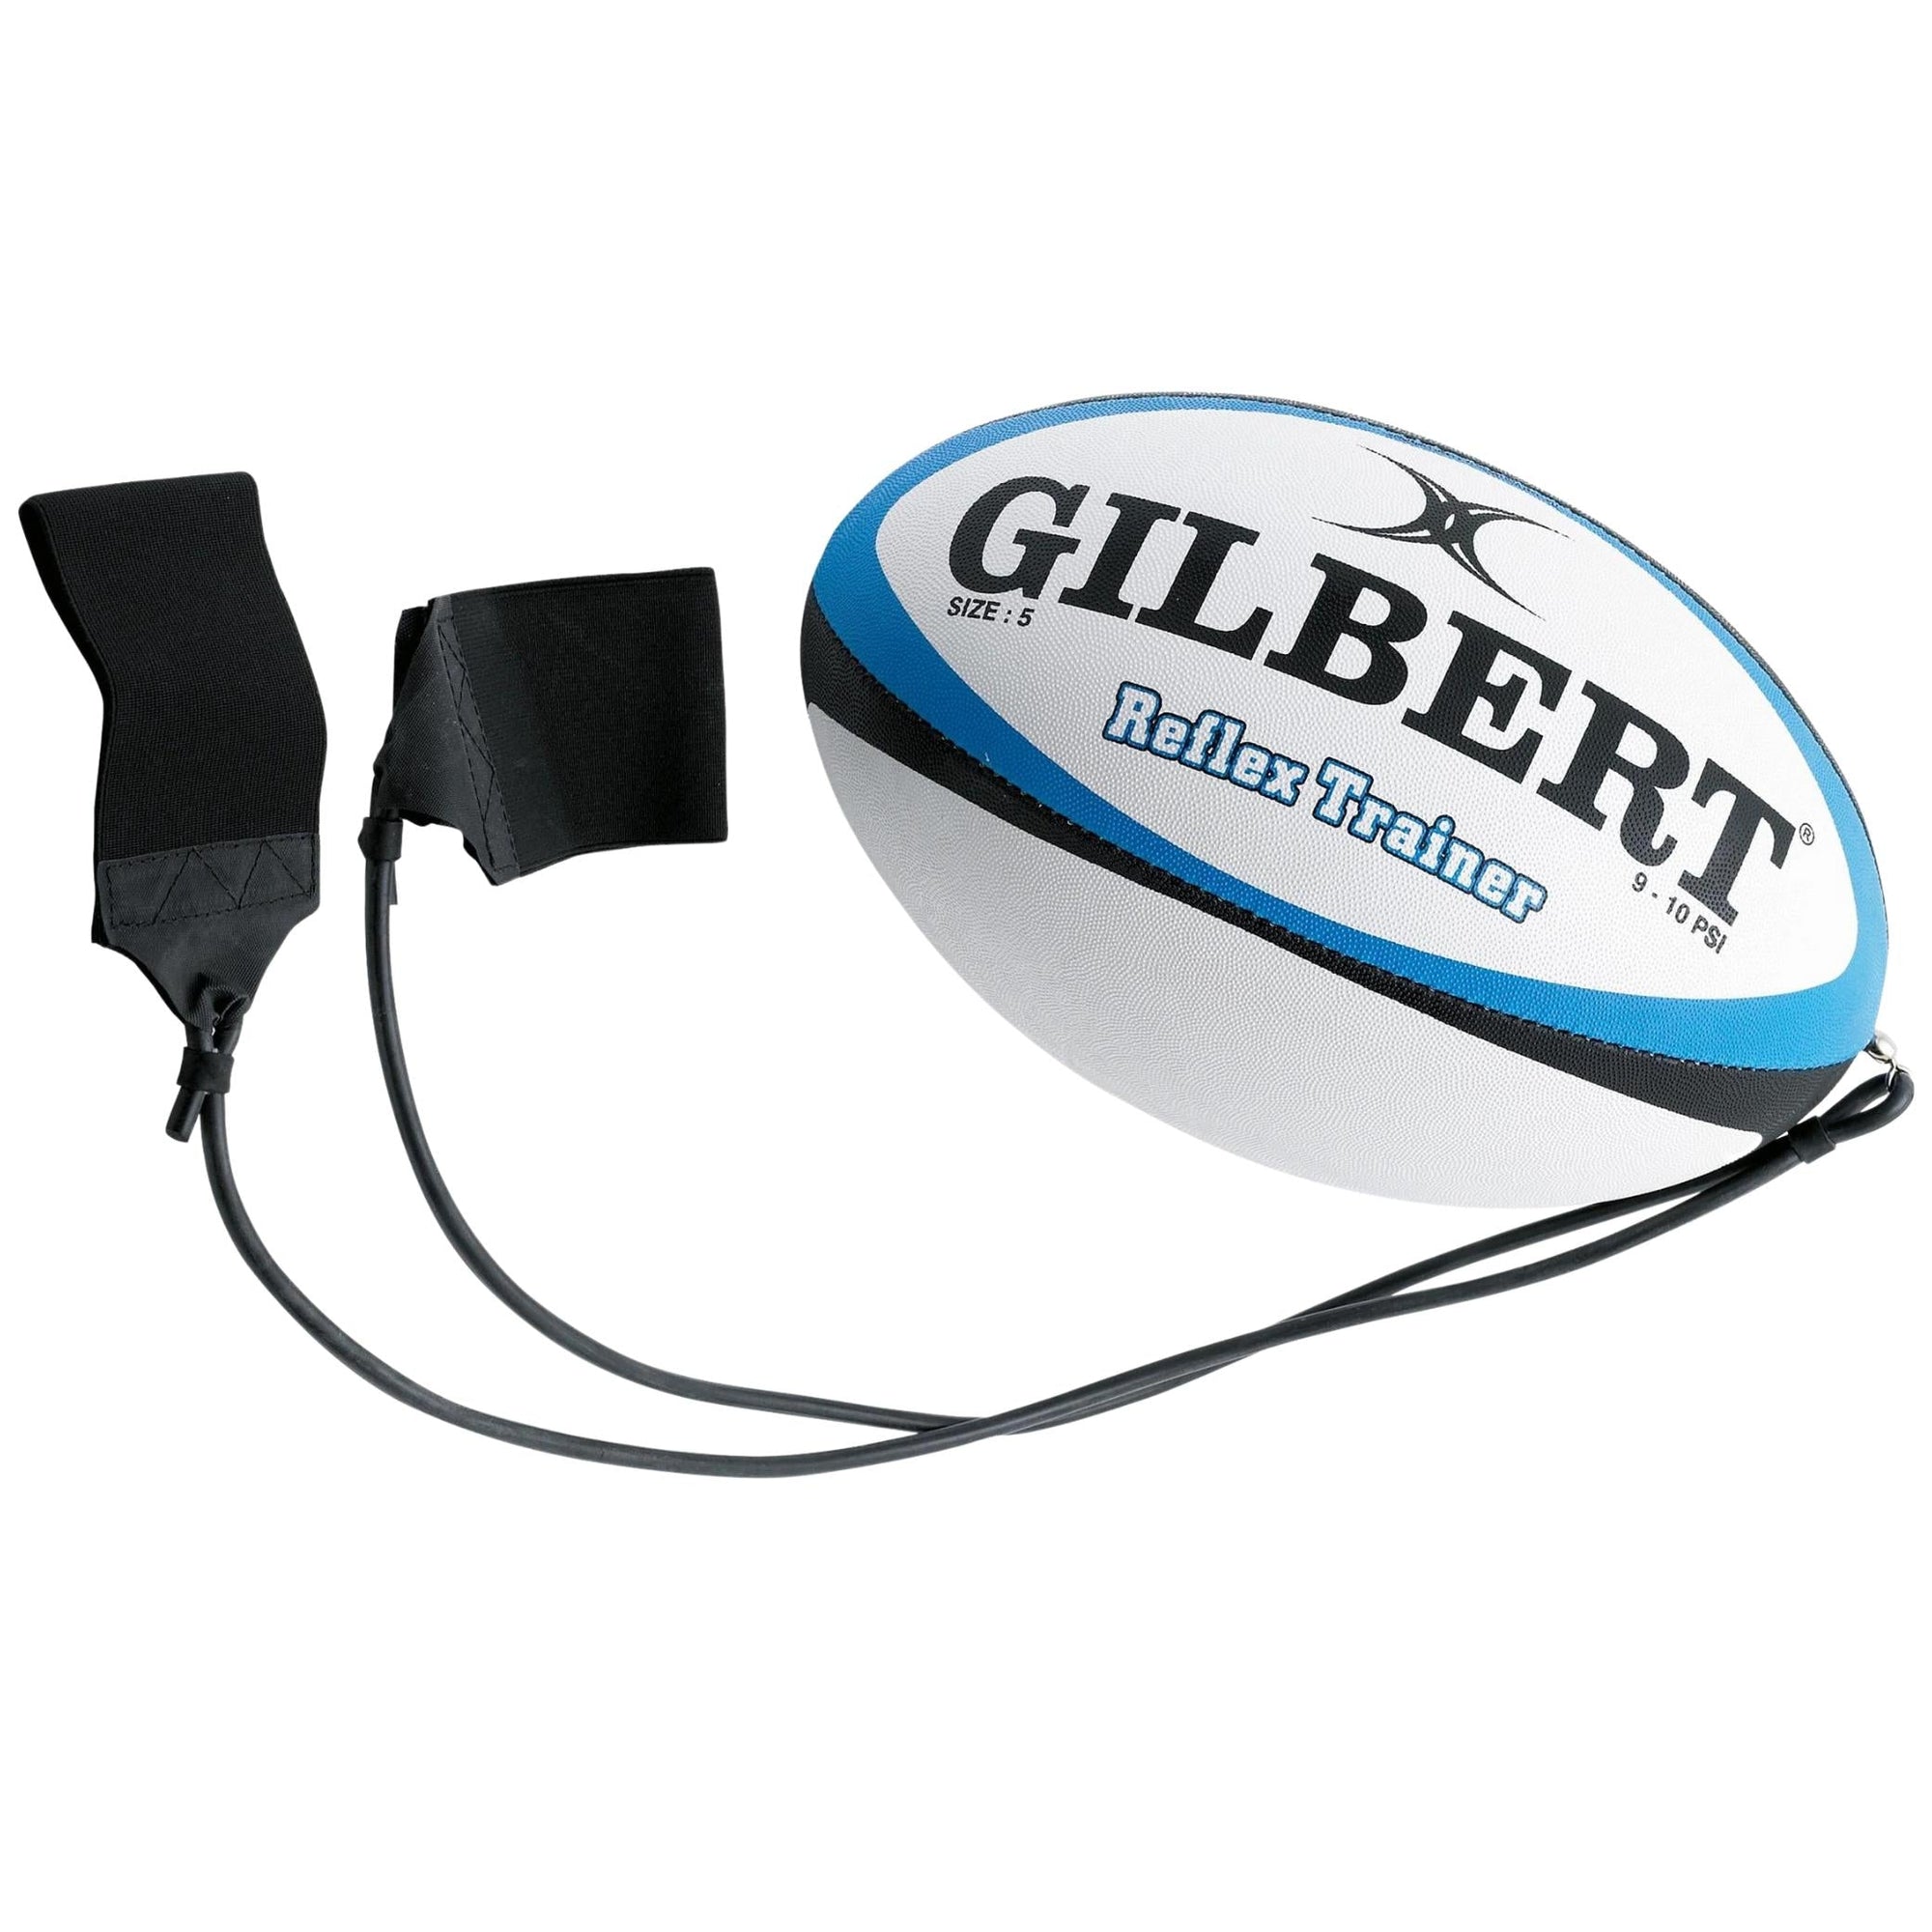 Rugby Imports Gilbert Reflex Trainer Rugby Rugby Ball